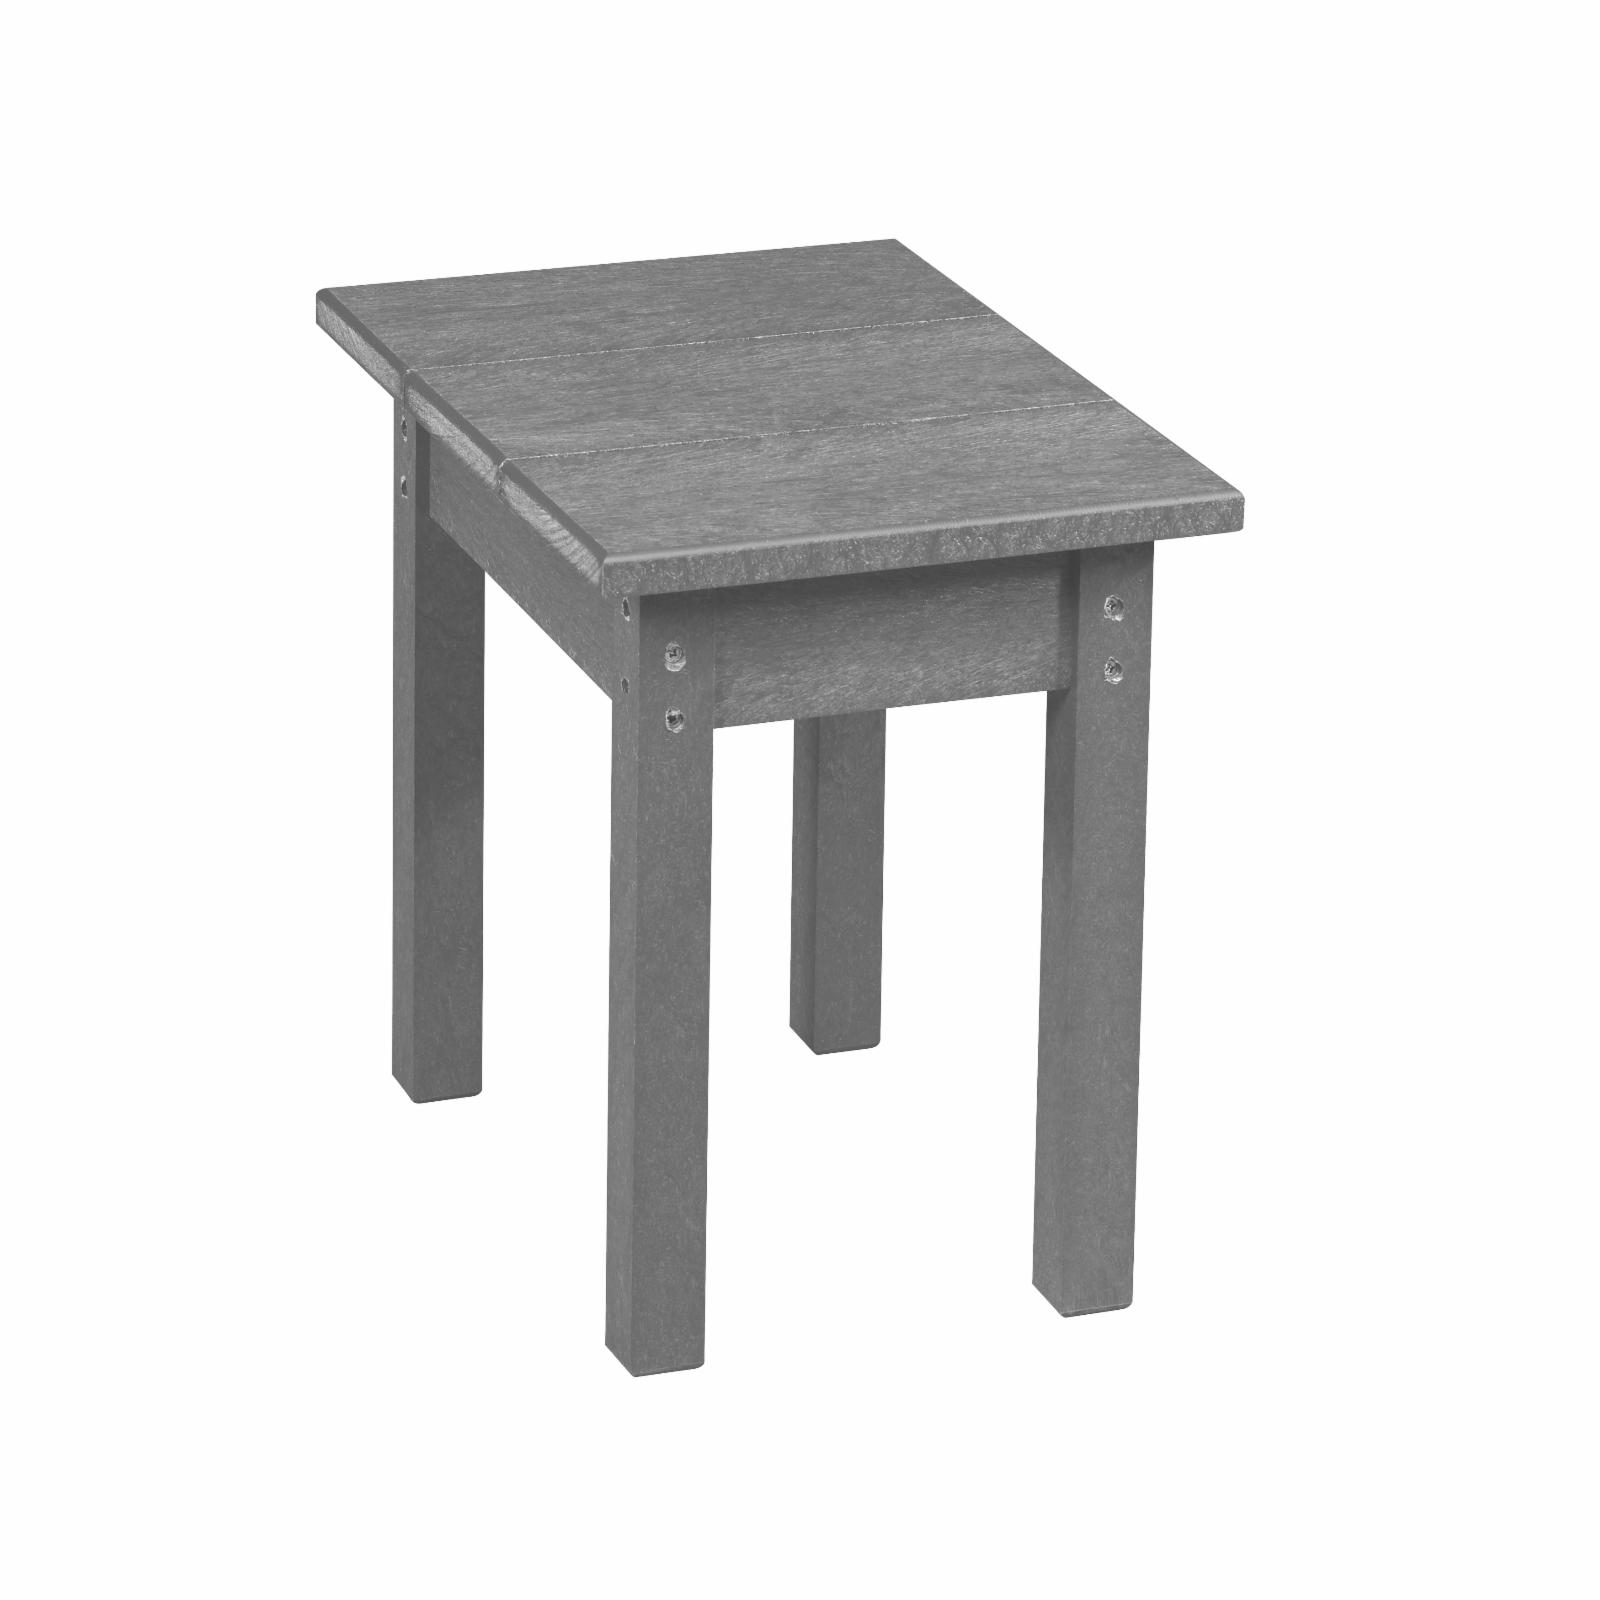 HN Outdoor Logan Recycled Plastic Small Outdoor Side Table - image 5 of 10